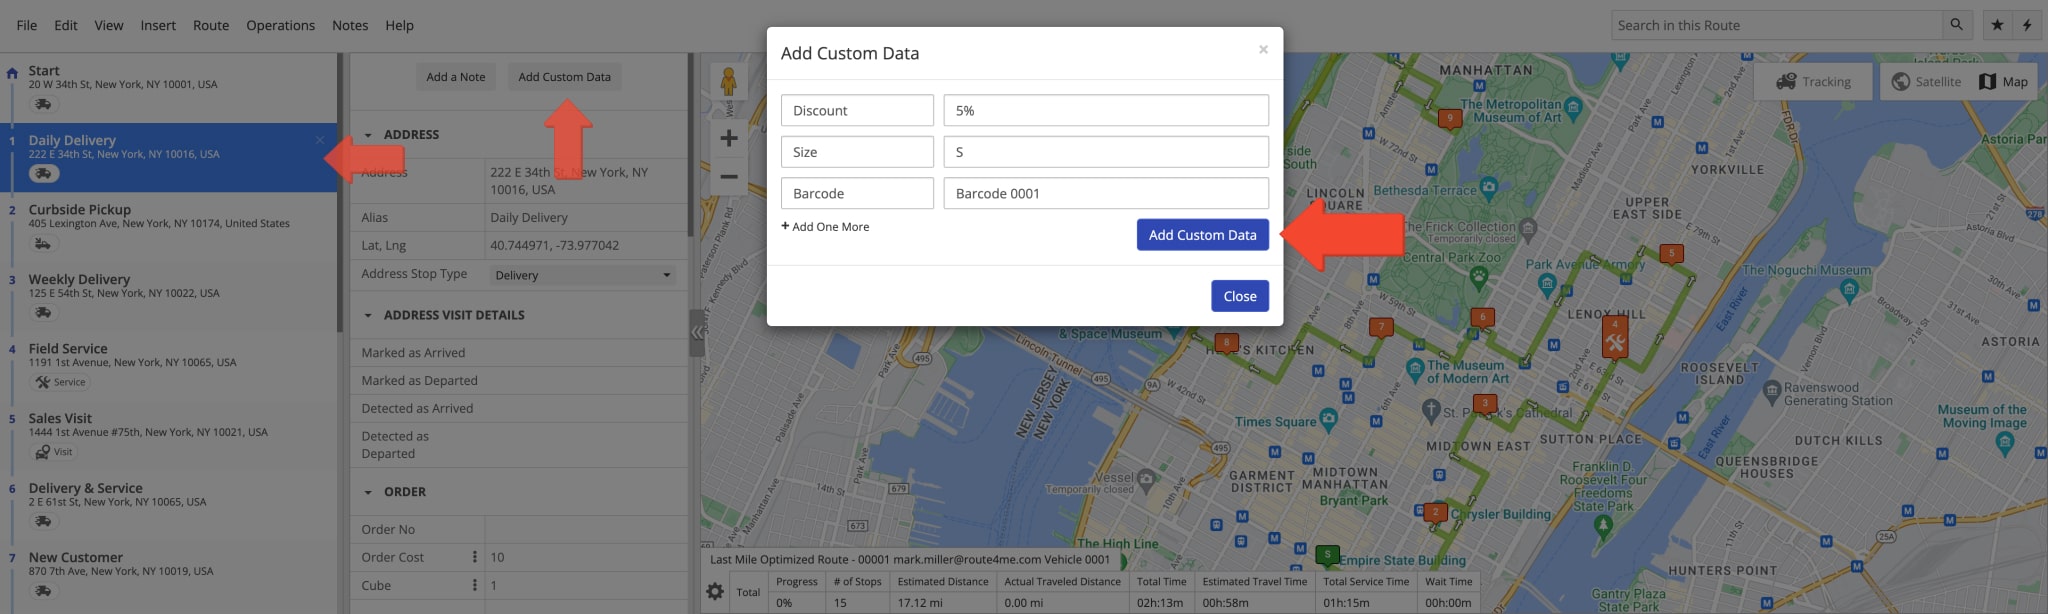 Add Custom Data to route stops in Route4Me's Route Editor.